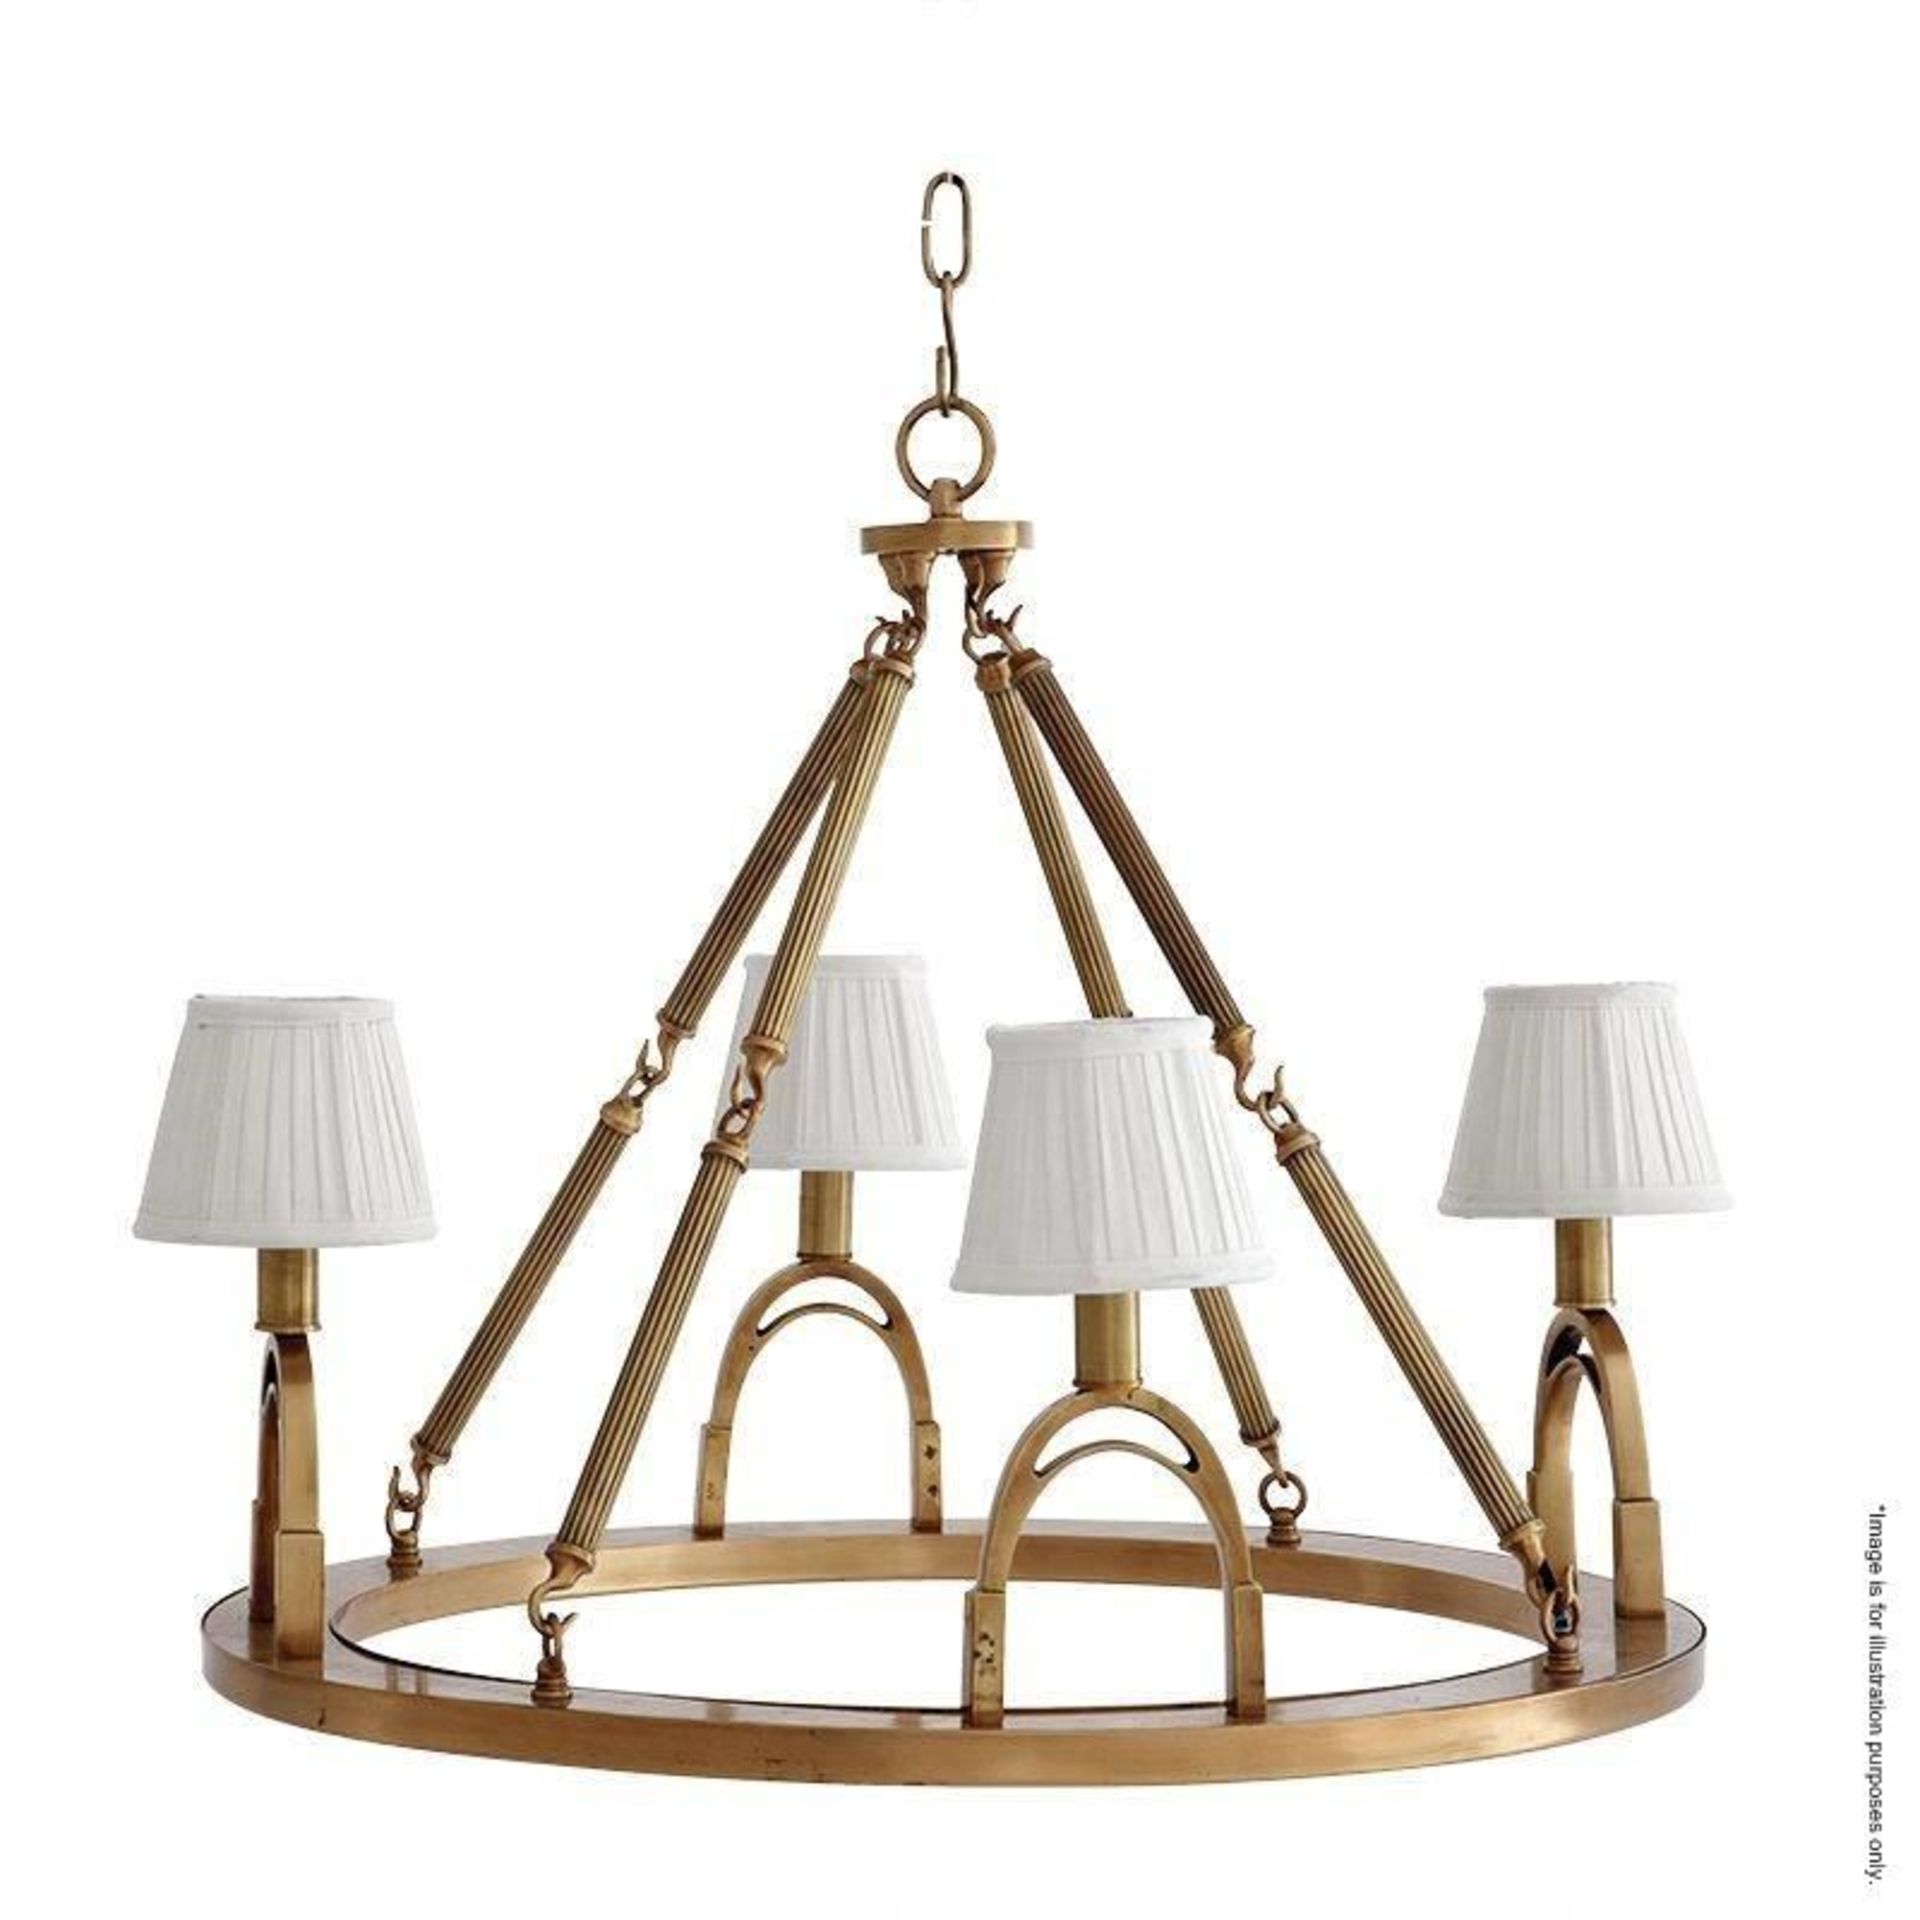 1 x Eichholtz 'Jigger' Equestrian-inspired Chandelier With An Aged Brass Finish - RRP £1,385